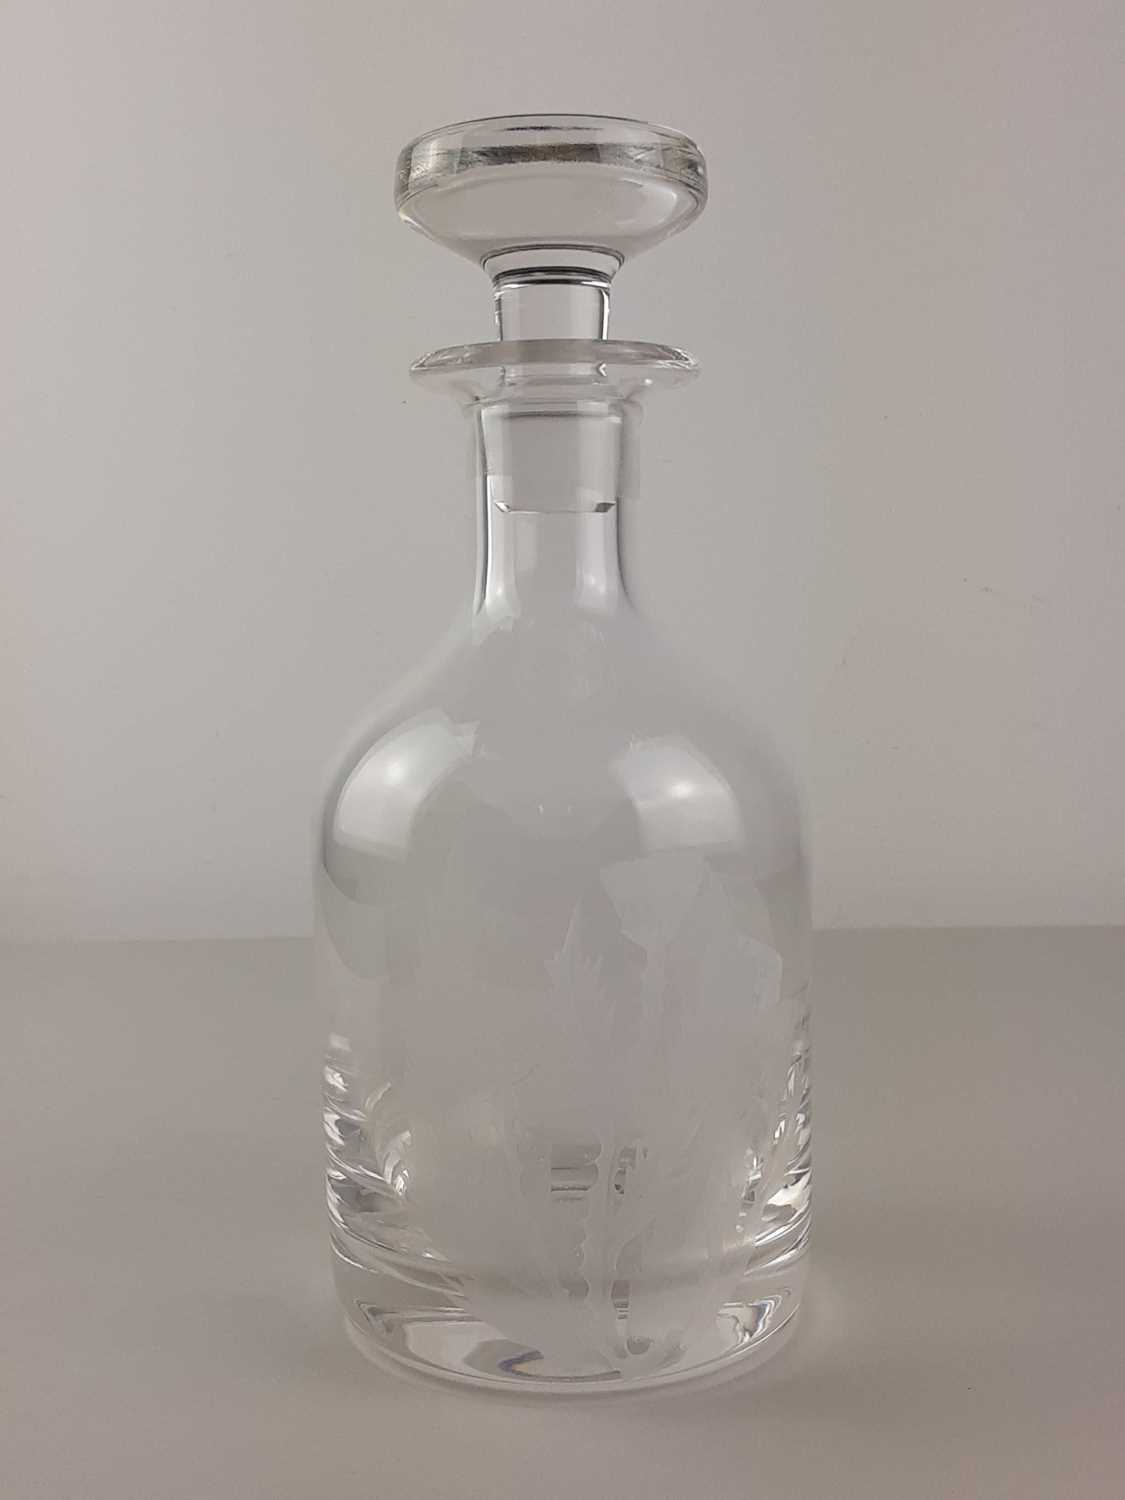 Lot 284 - GLASS DECANTER WITH STOPPER